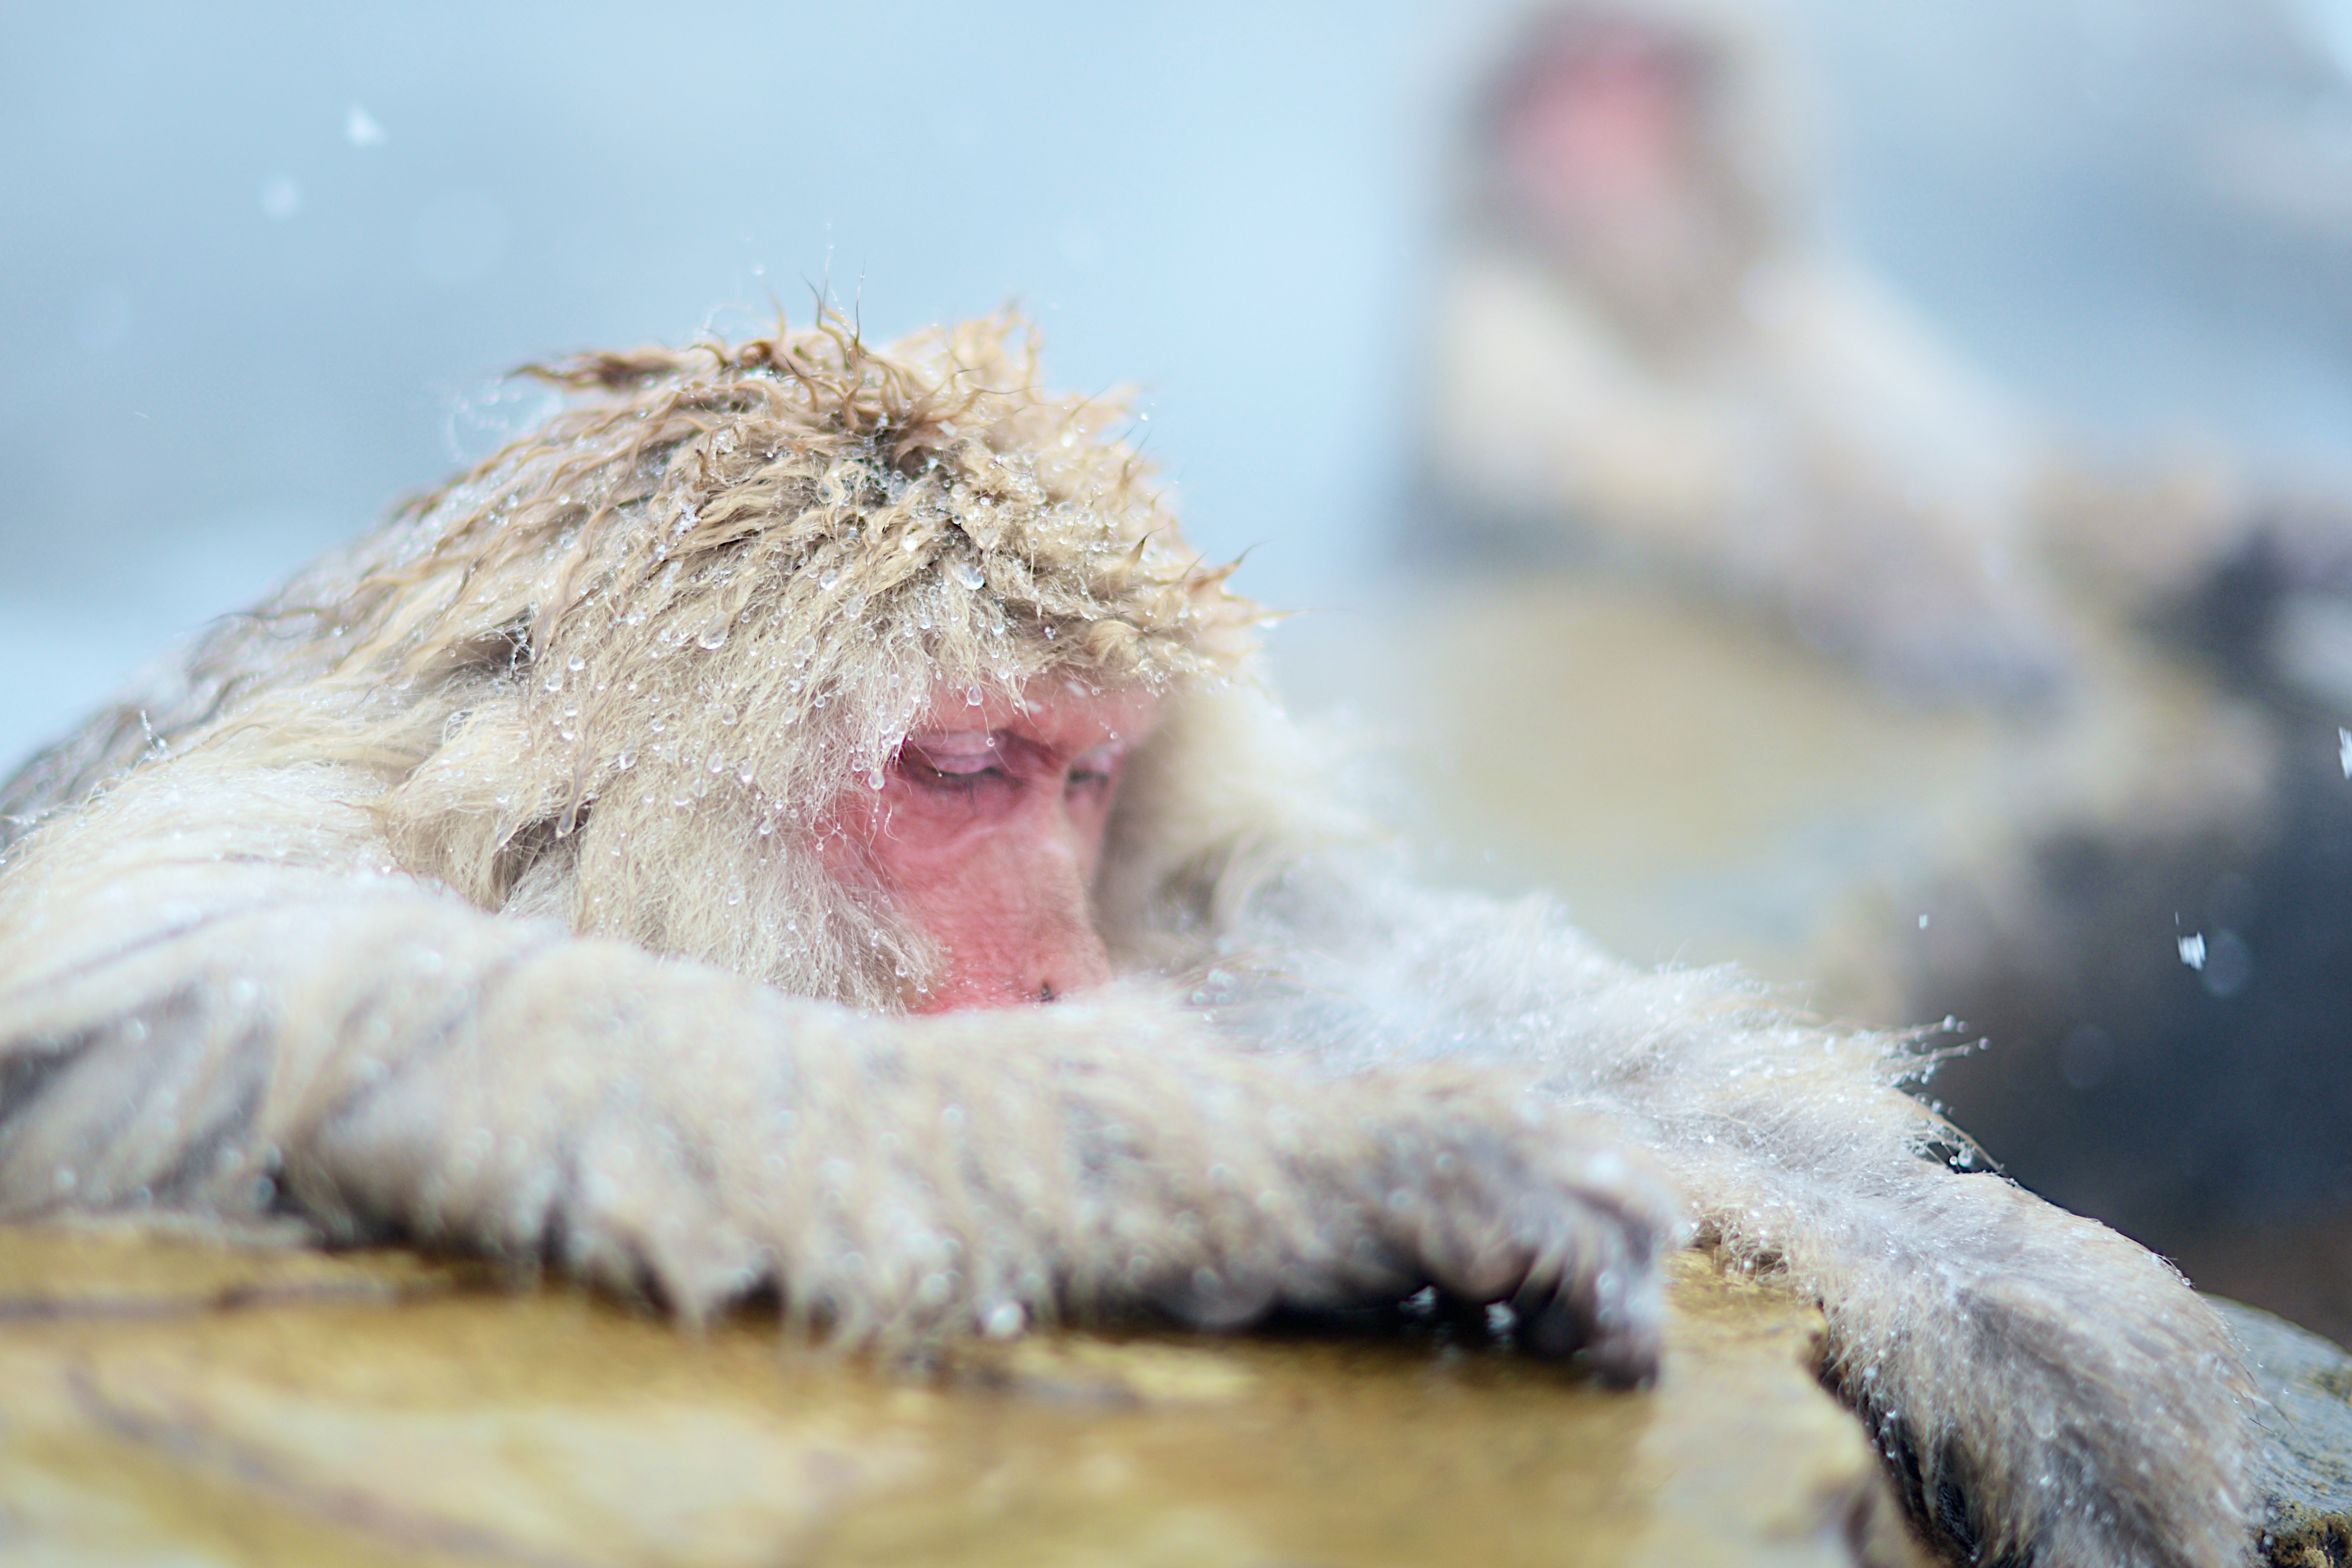 Monkey swimming in the pool in cold weather